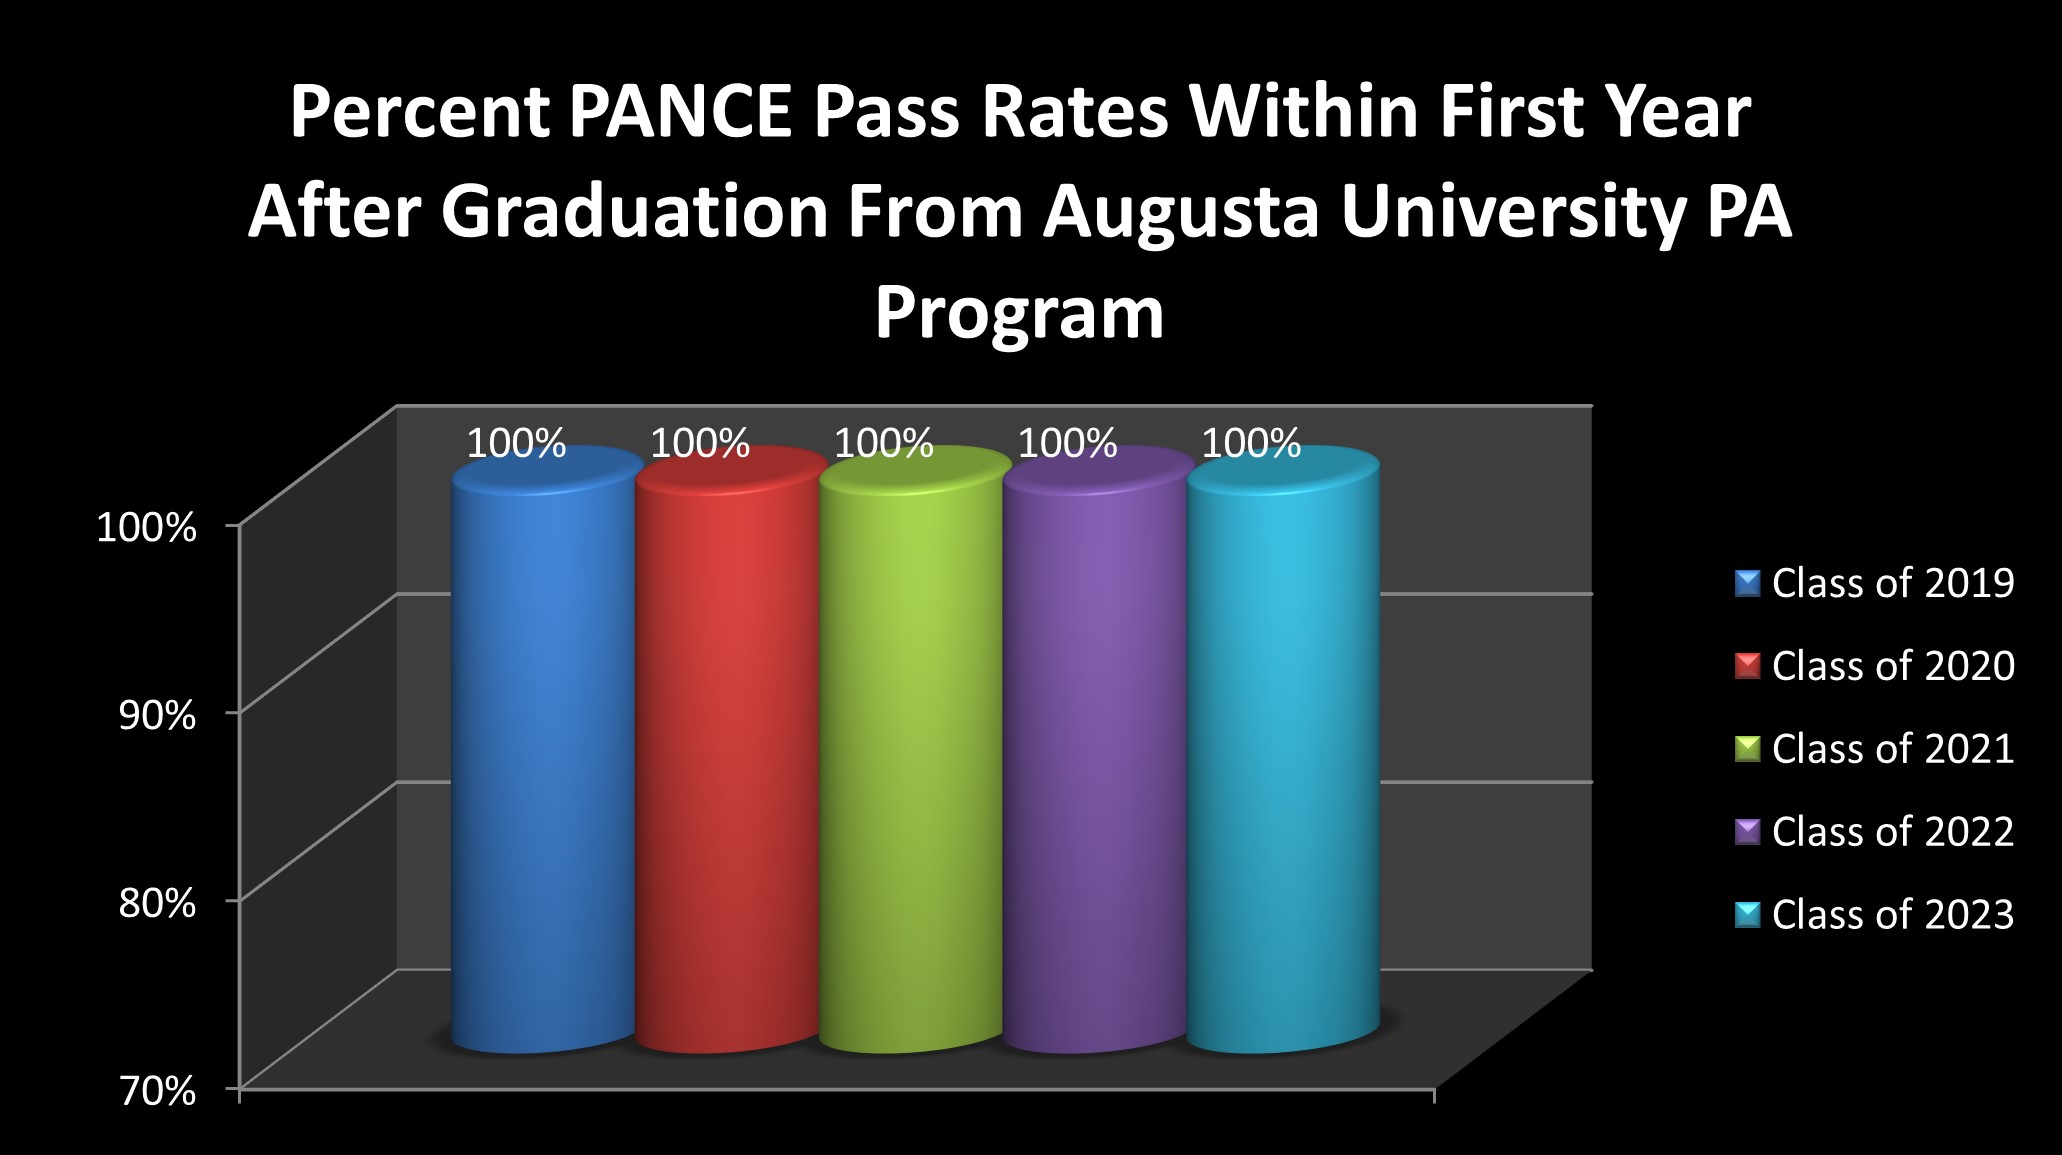 Percent PANCE Pass Rates Within First Year After Graduation